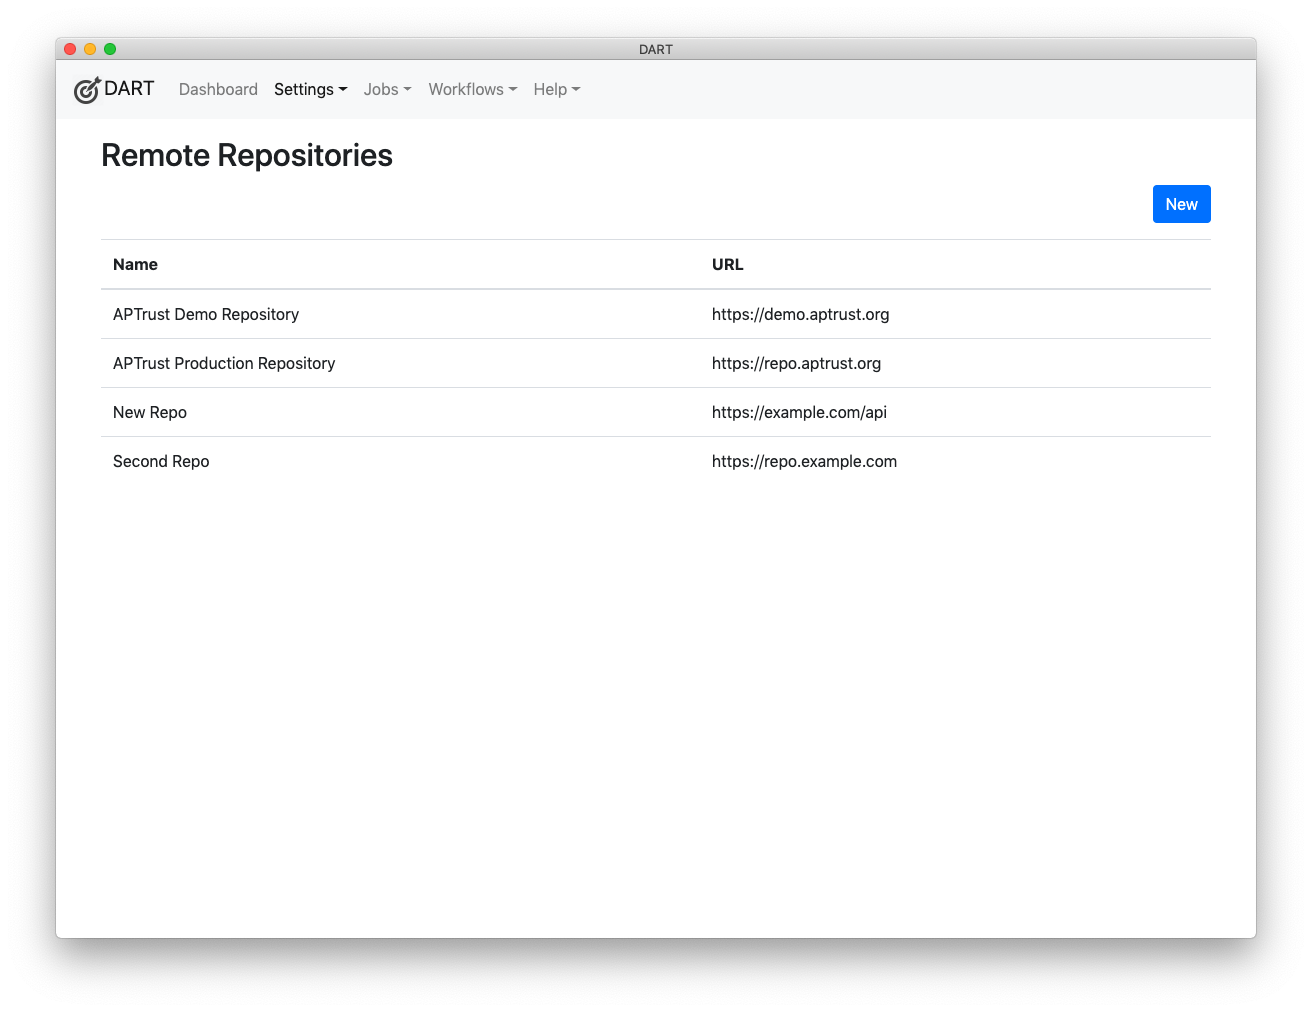 List of Remote Repositories